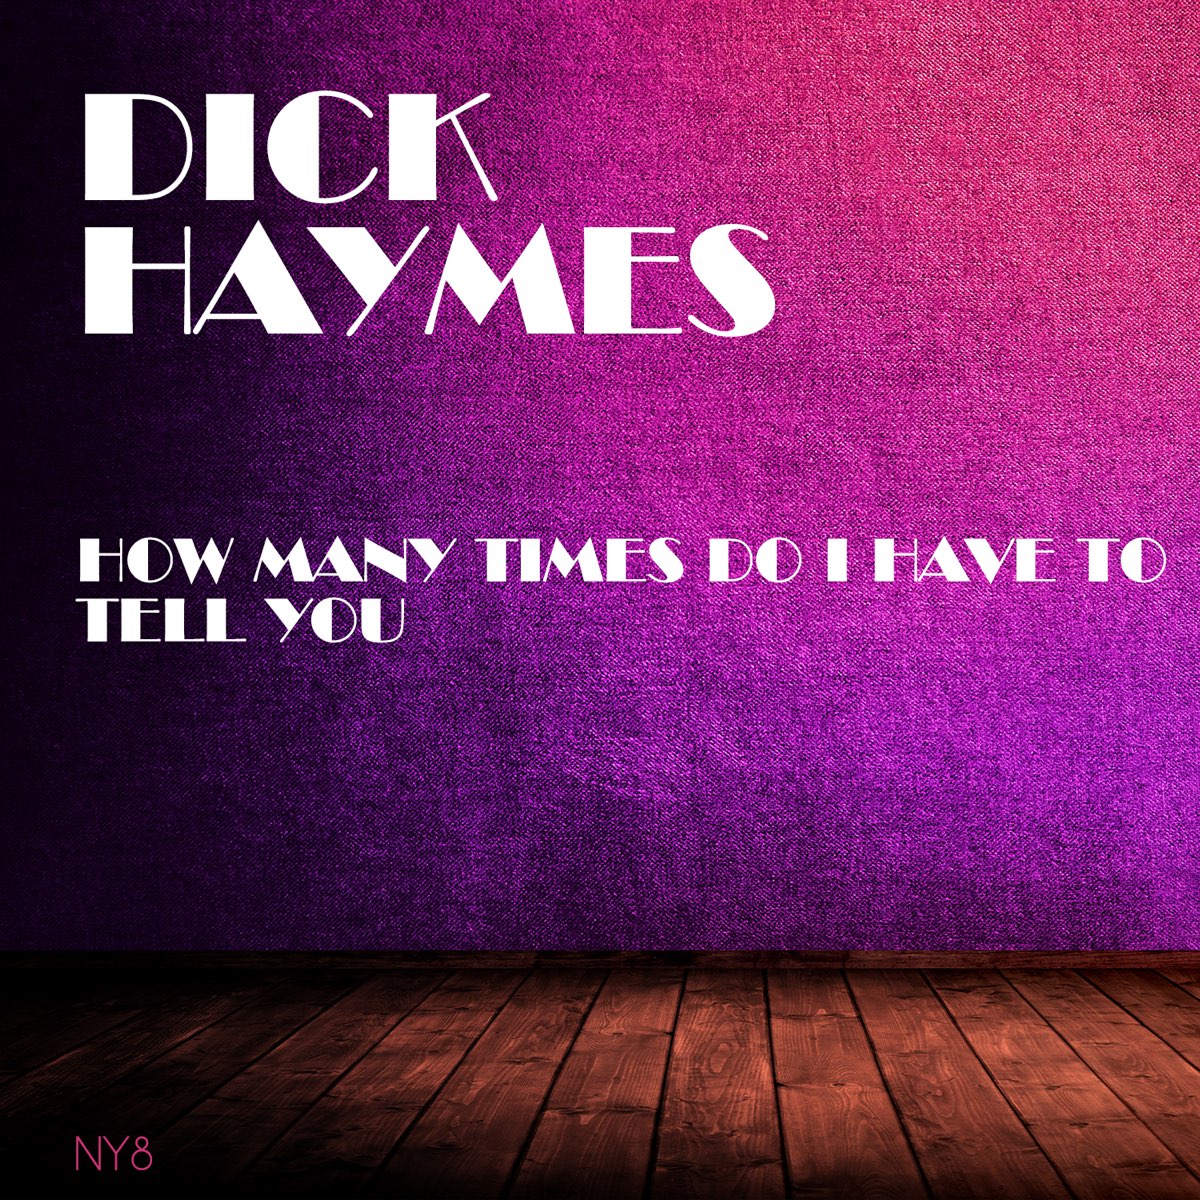 ‎Альбом How Many Times Do I Have To Tell You Dick Haymes в Apple Music 